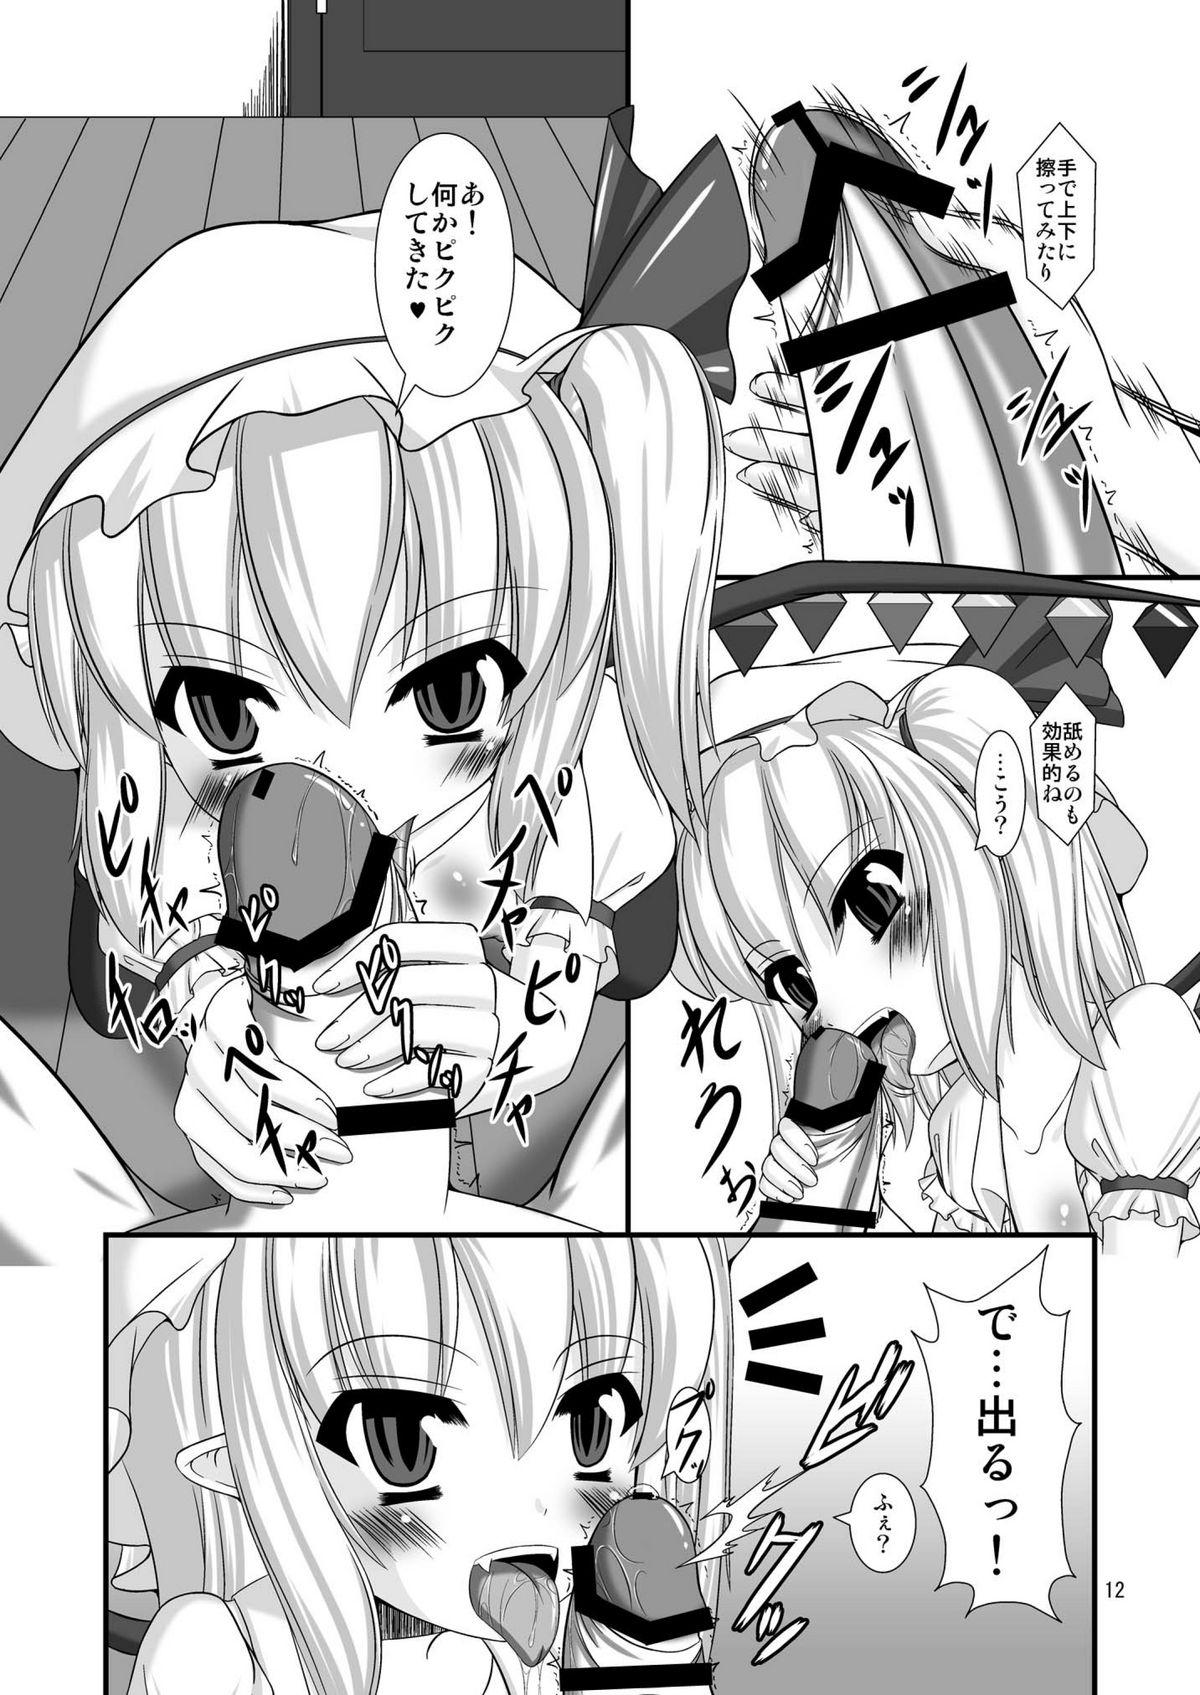 Licking Touhou do-M Hoihoi - Touhou project Youporn - Page 12